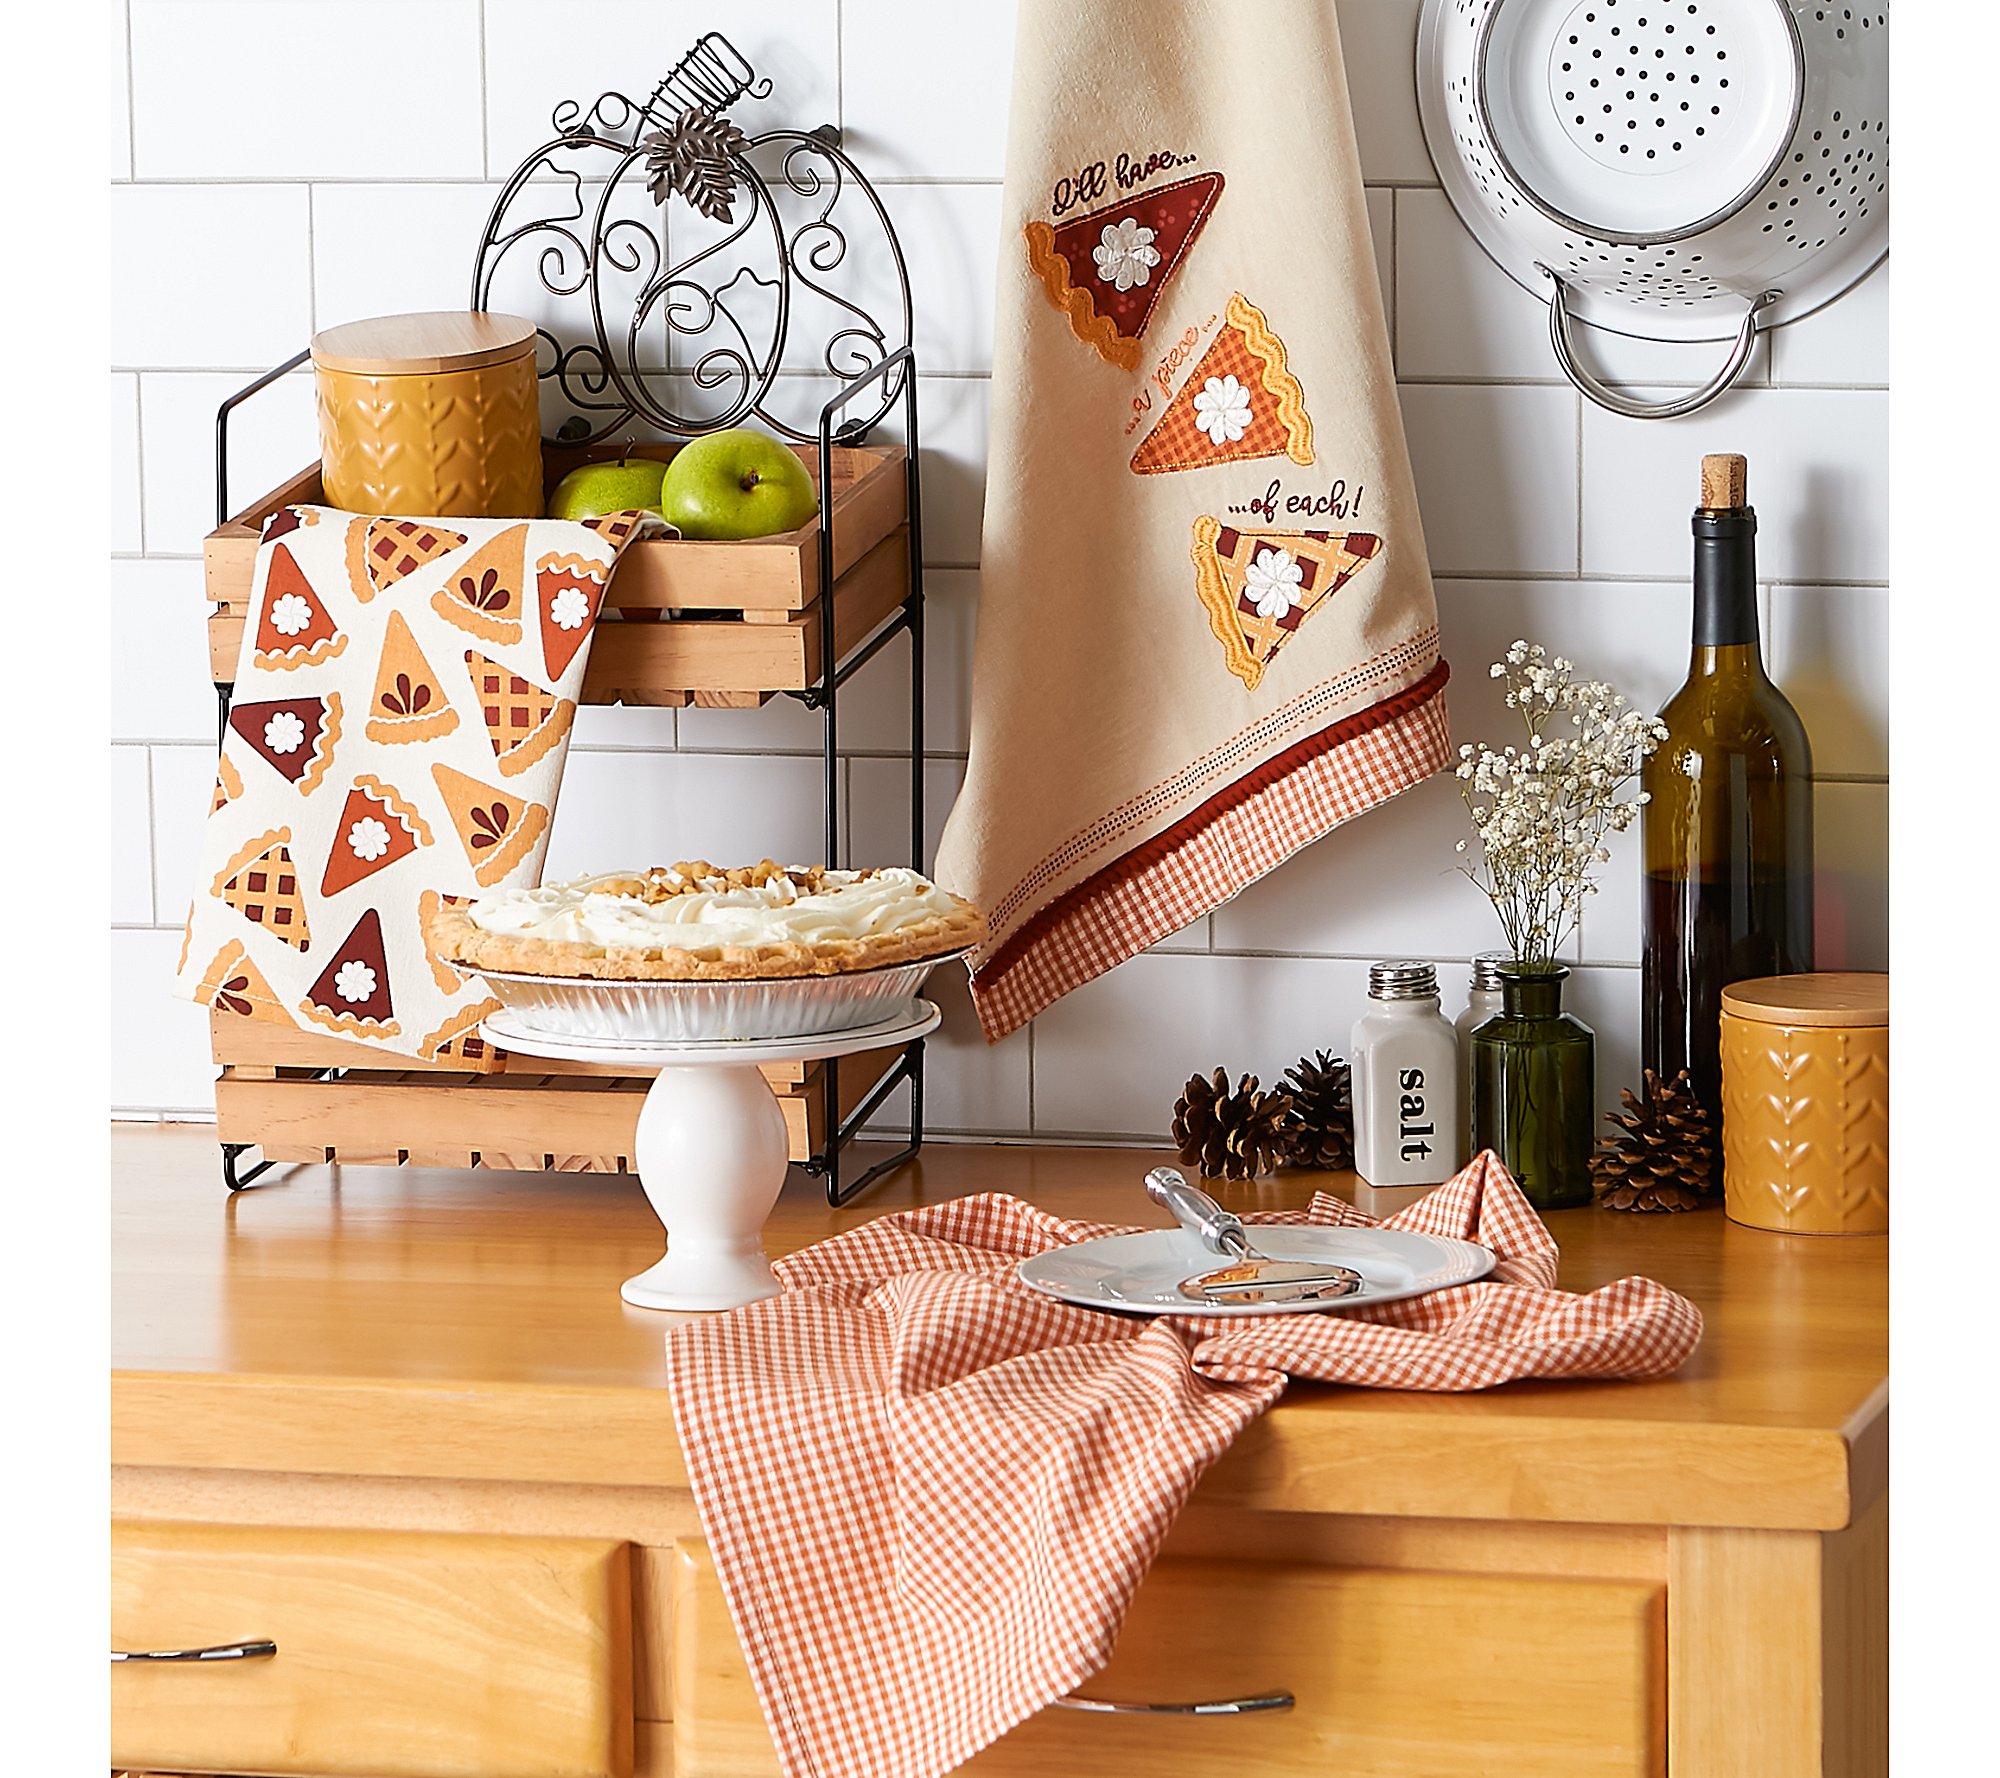 Design Imports Set of 3 Assorted Pie Slice  Kit chen Towels